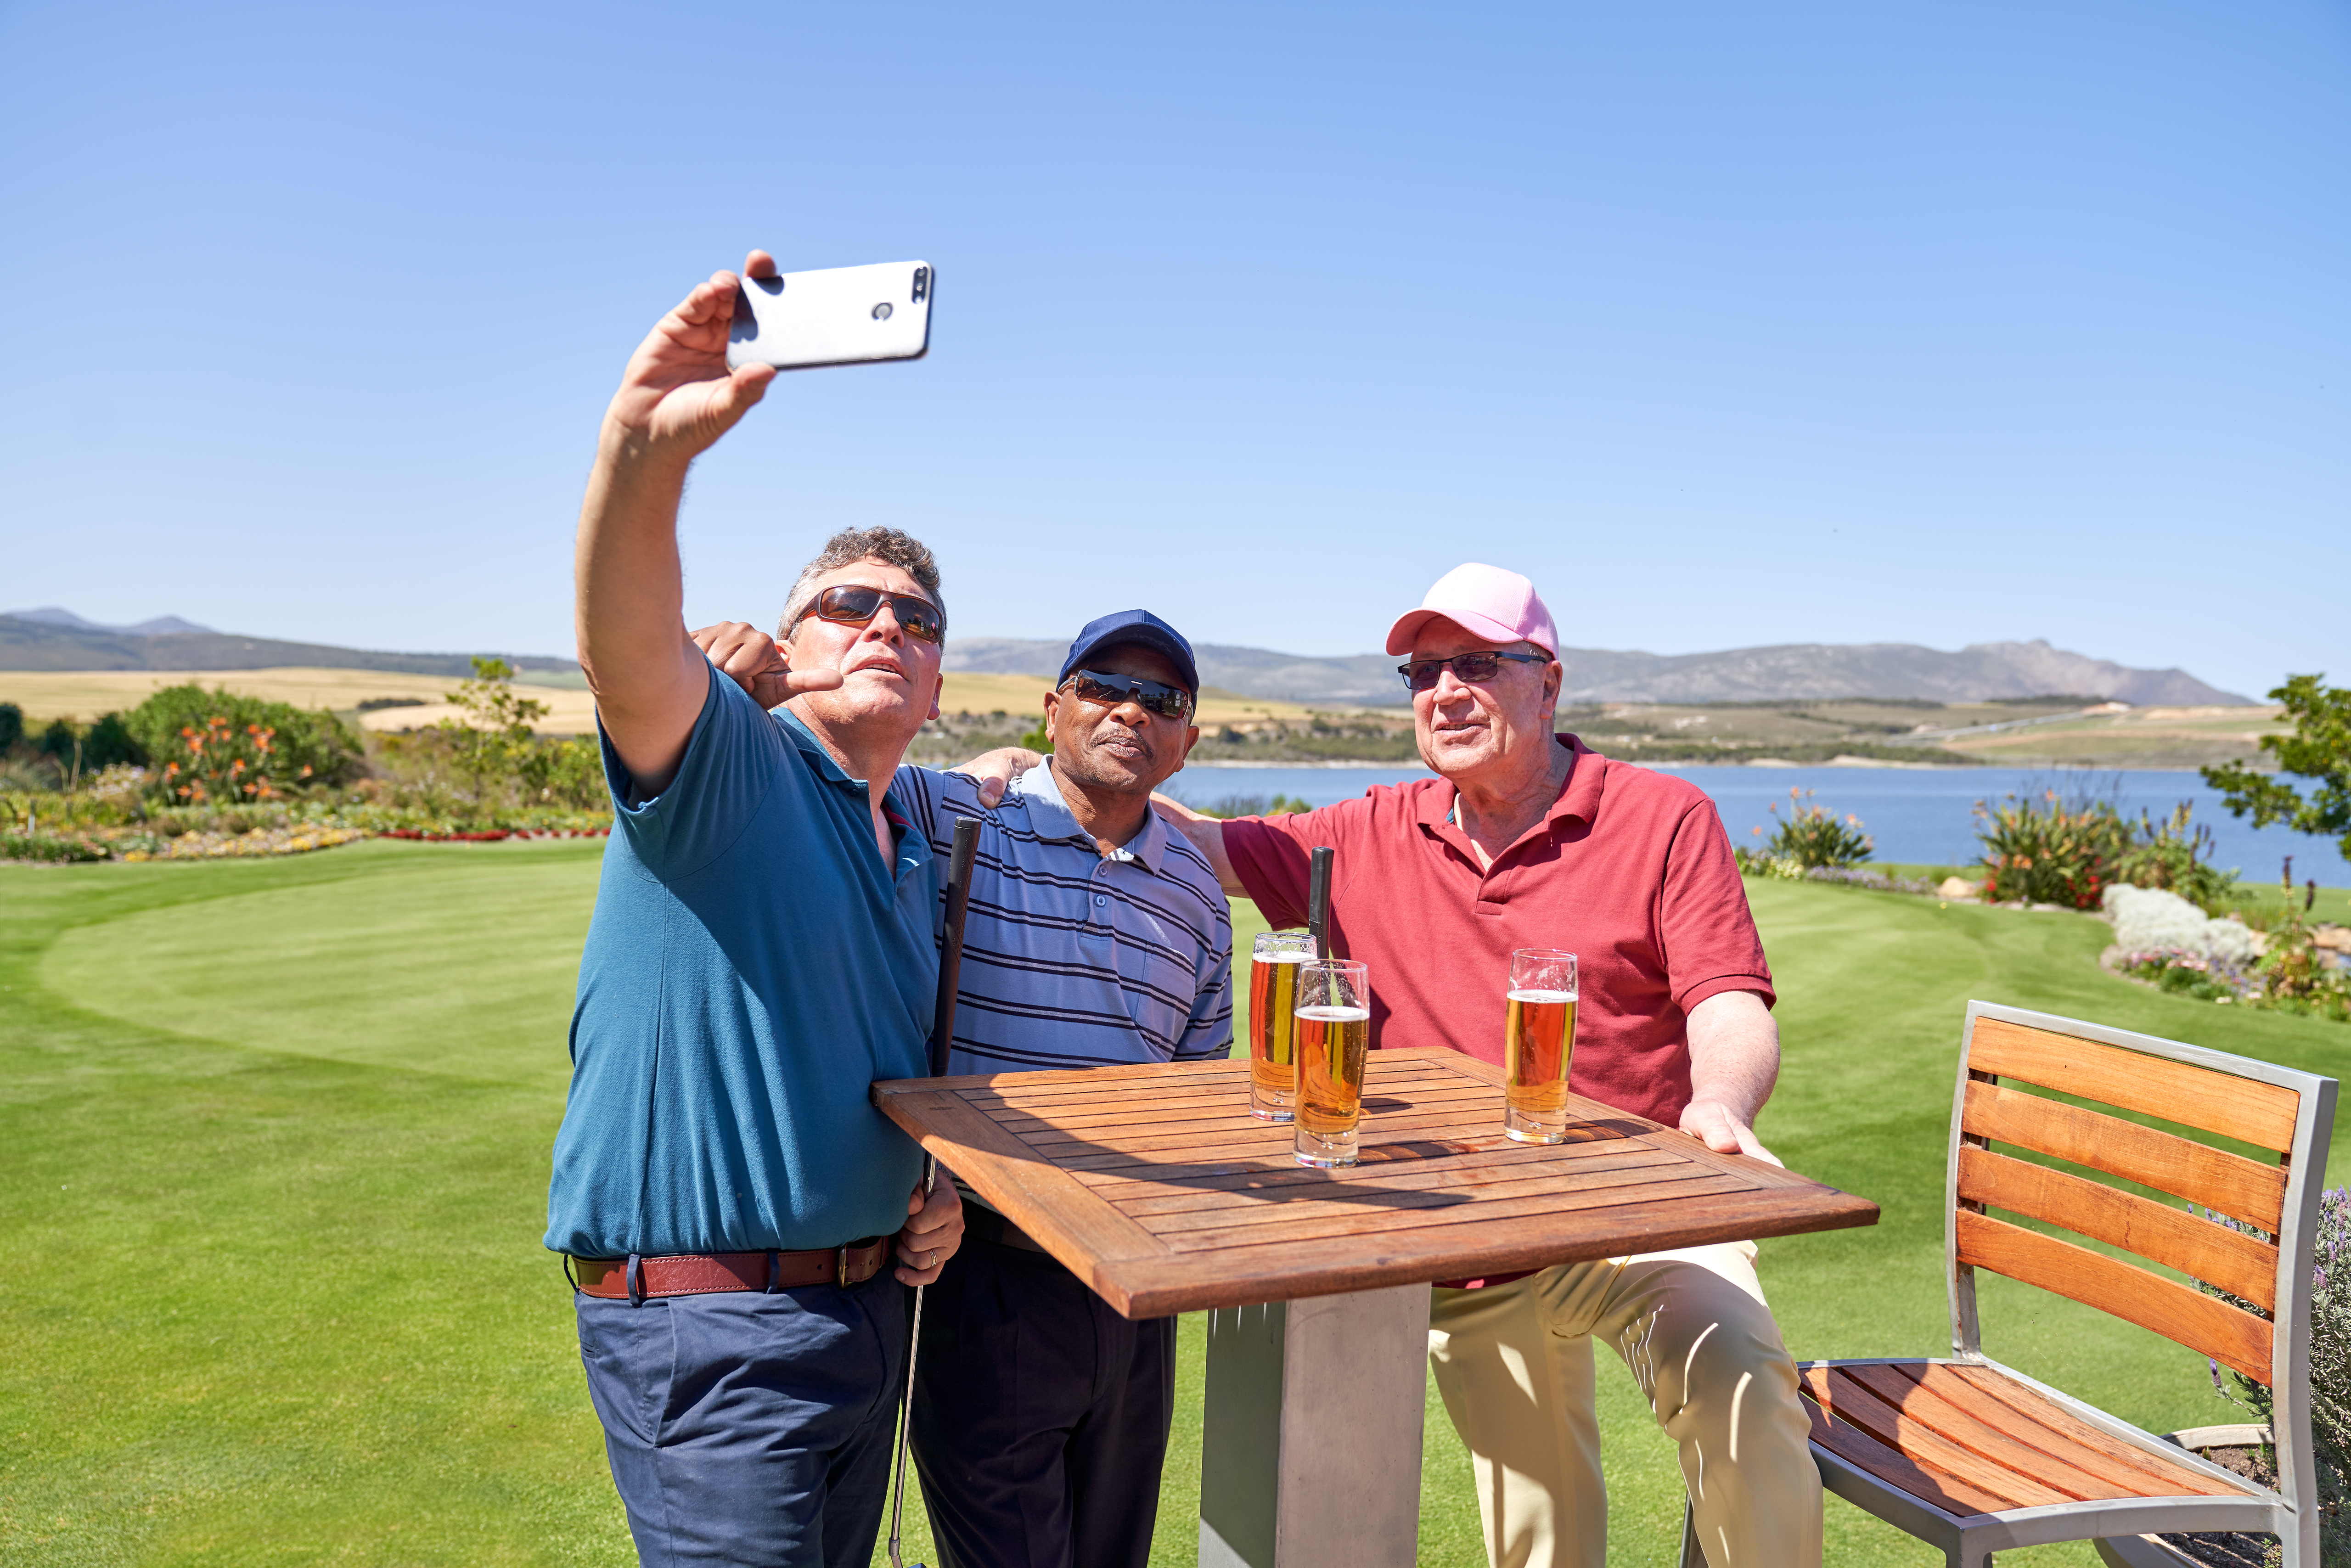 Want to survive a buddies golf trip? Our experts share more than a